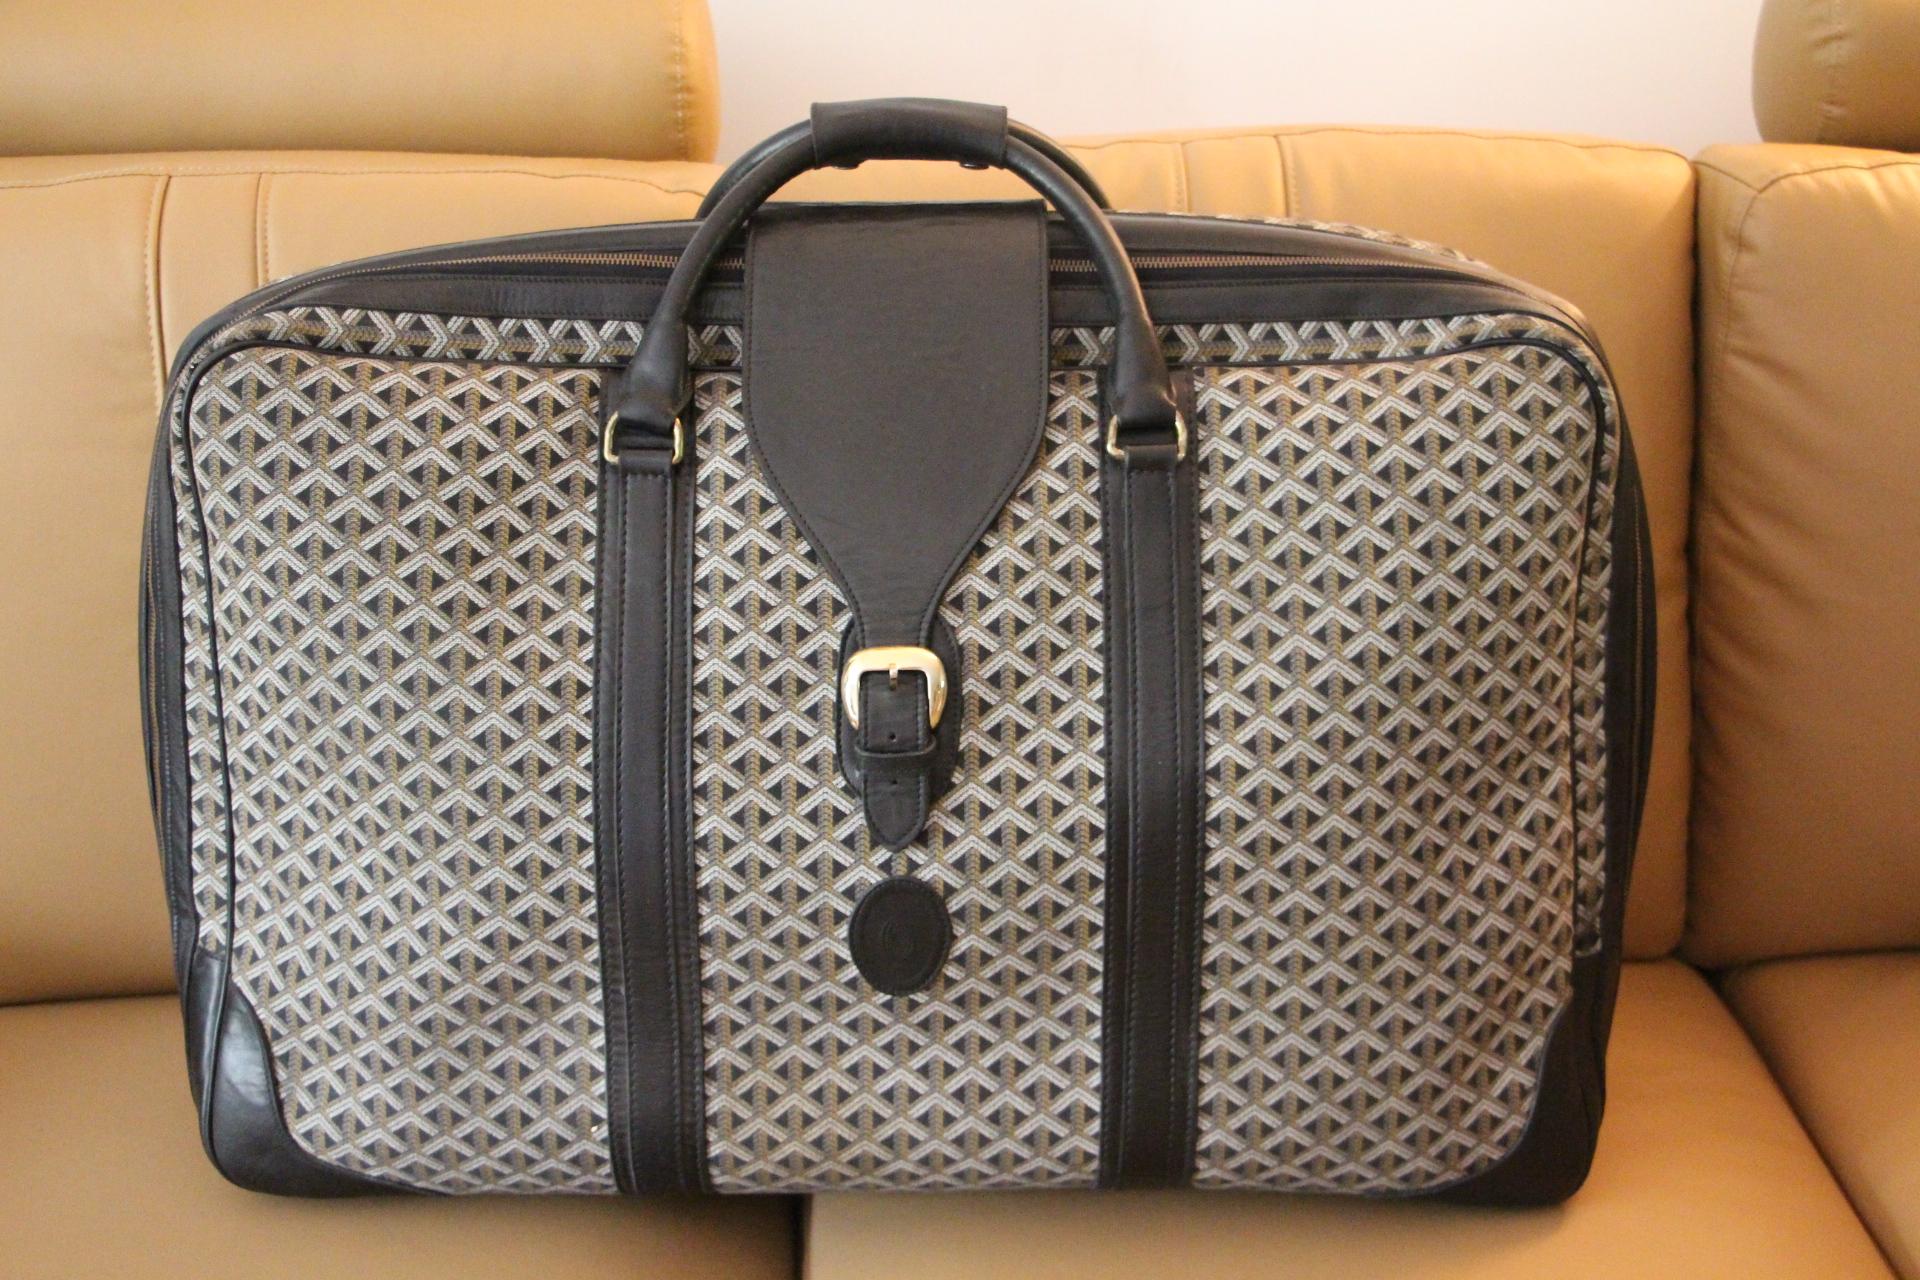 This beautiful Goyard suitcase features the very sought after woven canvas and black leather.Its sturdy and comfortable handles are in black eather as well as its large flap.It also features an oval leather escutcheon embossed with Goyard logo.
All